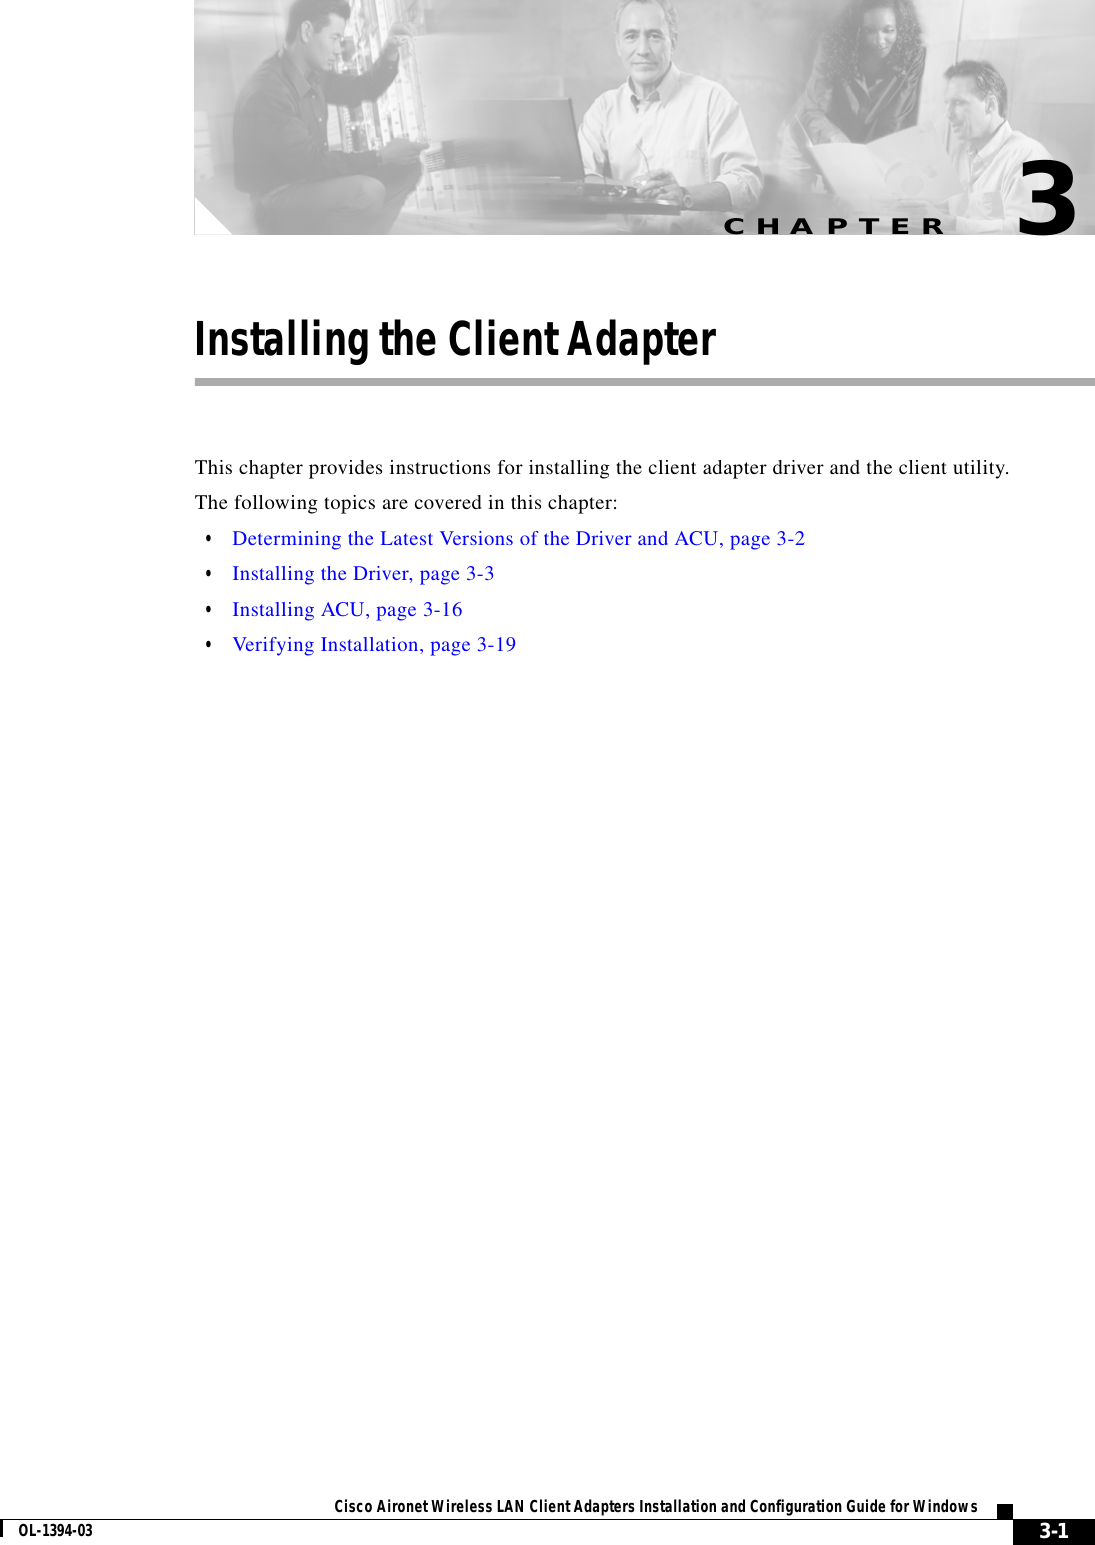 CHAPTER3-1Cisco Aironet Wireless LAN Client Adapters Installation and Configuration Guide for WindowsOL-1394-033Installing the Client AdapterThis chapter provides instructions for installing the client adapter driver and the client utility.The following topics are covered in this chapter:•Determining the Latest Versions of the Driver and ACU, page 3-2•Installing the Driver, page 3-3•Installing ACU, page 3-16•Verifying Installation, page 3-19